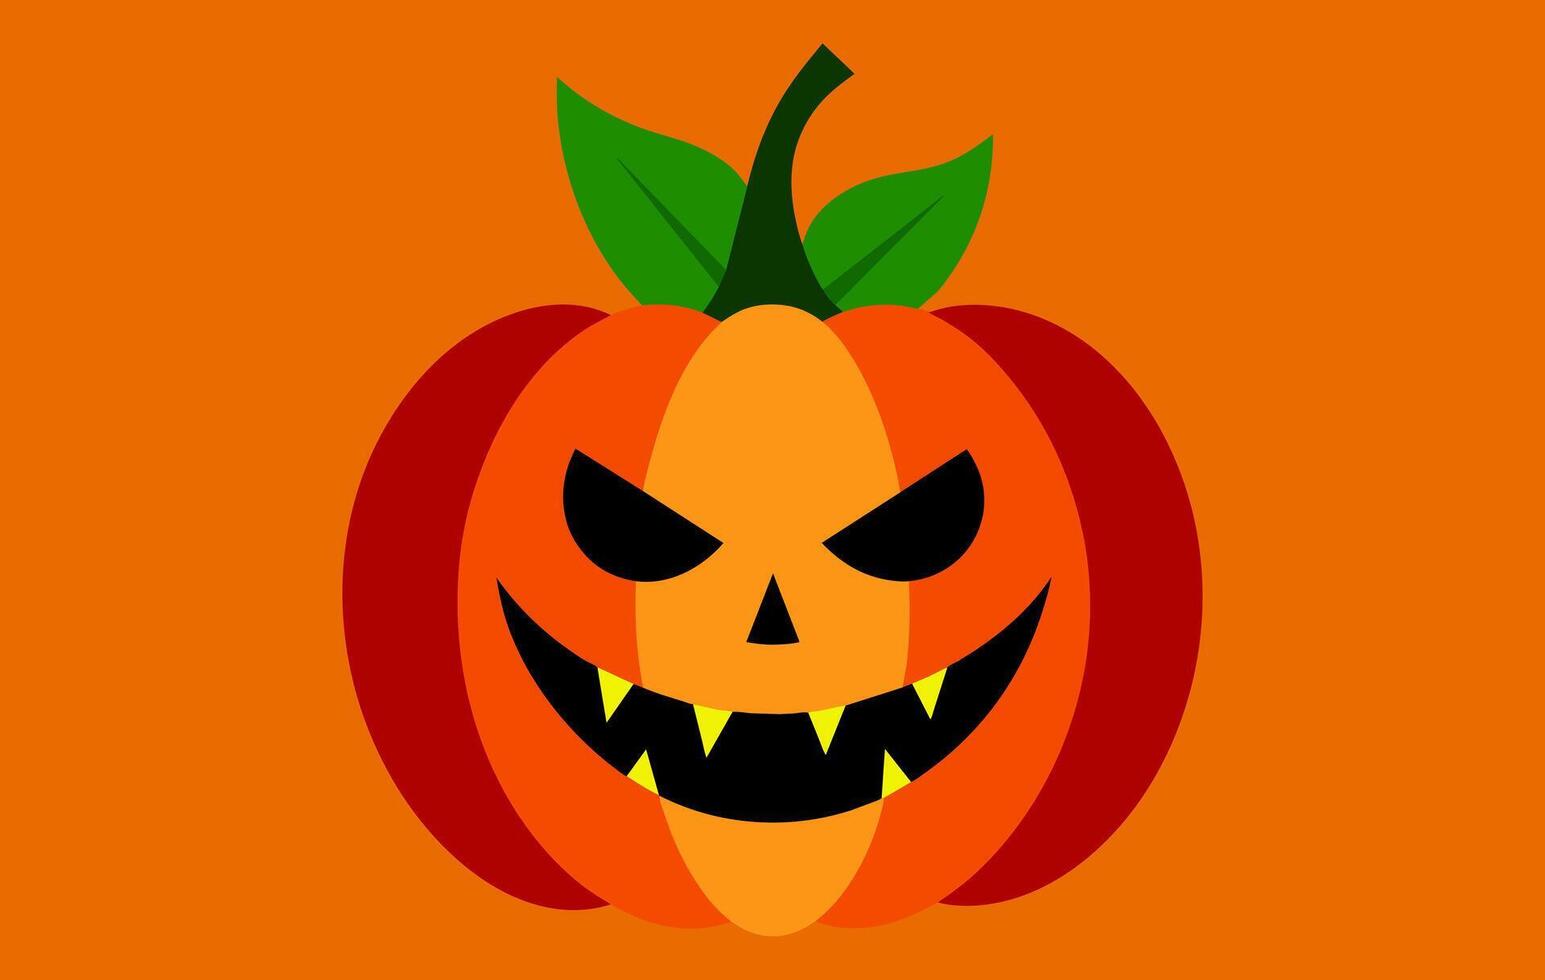 Carved Halloween pumpkin with a fierce face. Jack-o-lantern illustration. Isolated on orange background. Concept of Halloween, spooky decoration, trick or treat, festive decor, holiday celebration vector